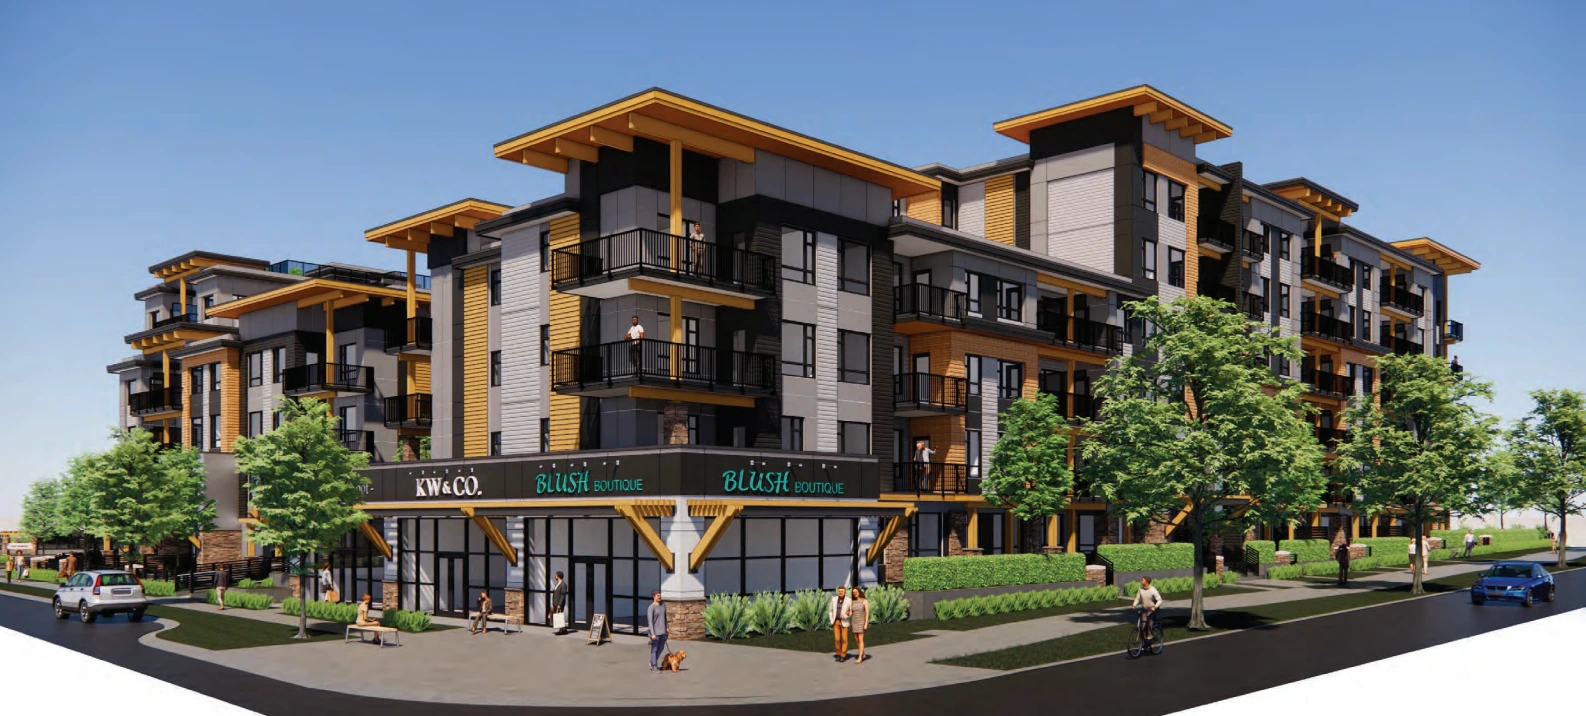 Walnut Park Langley is a collection of 211 condominiums by Quadra Homes.